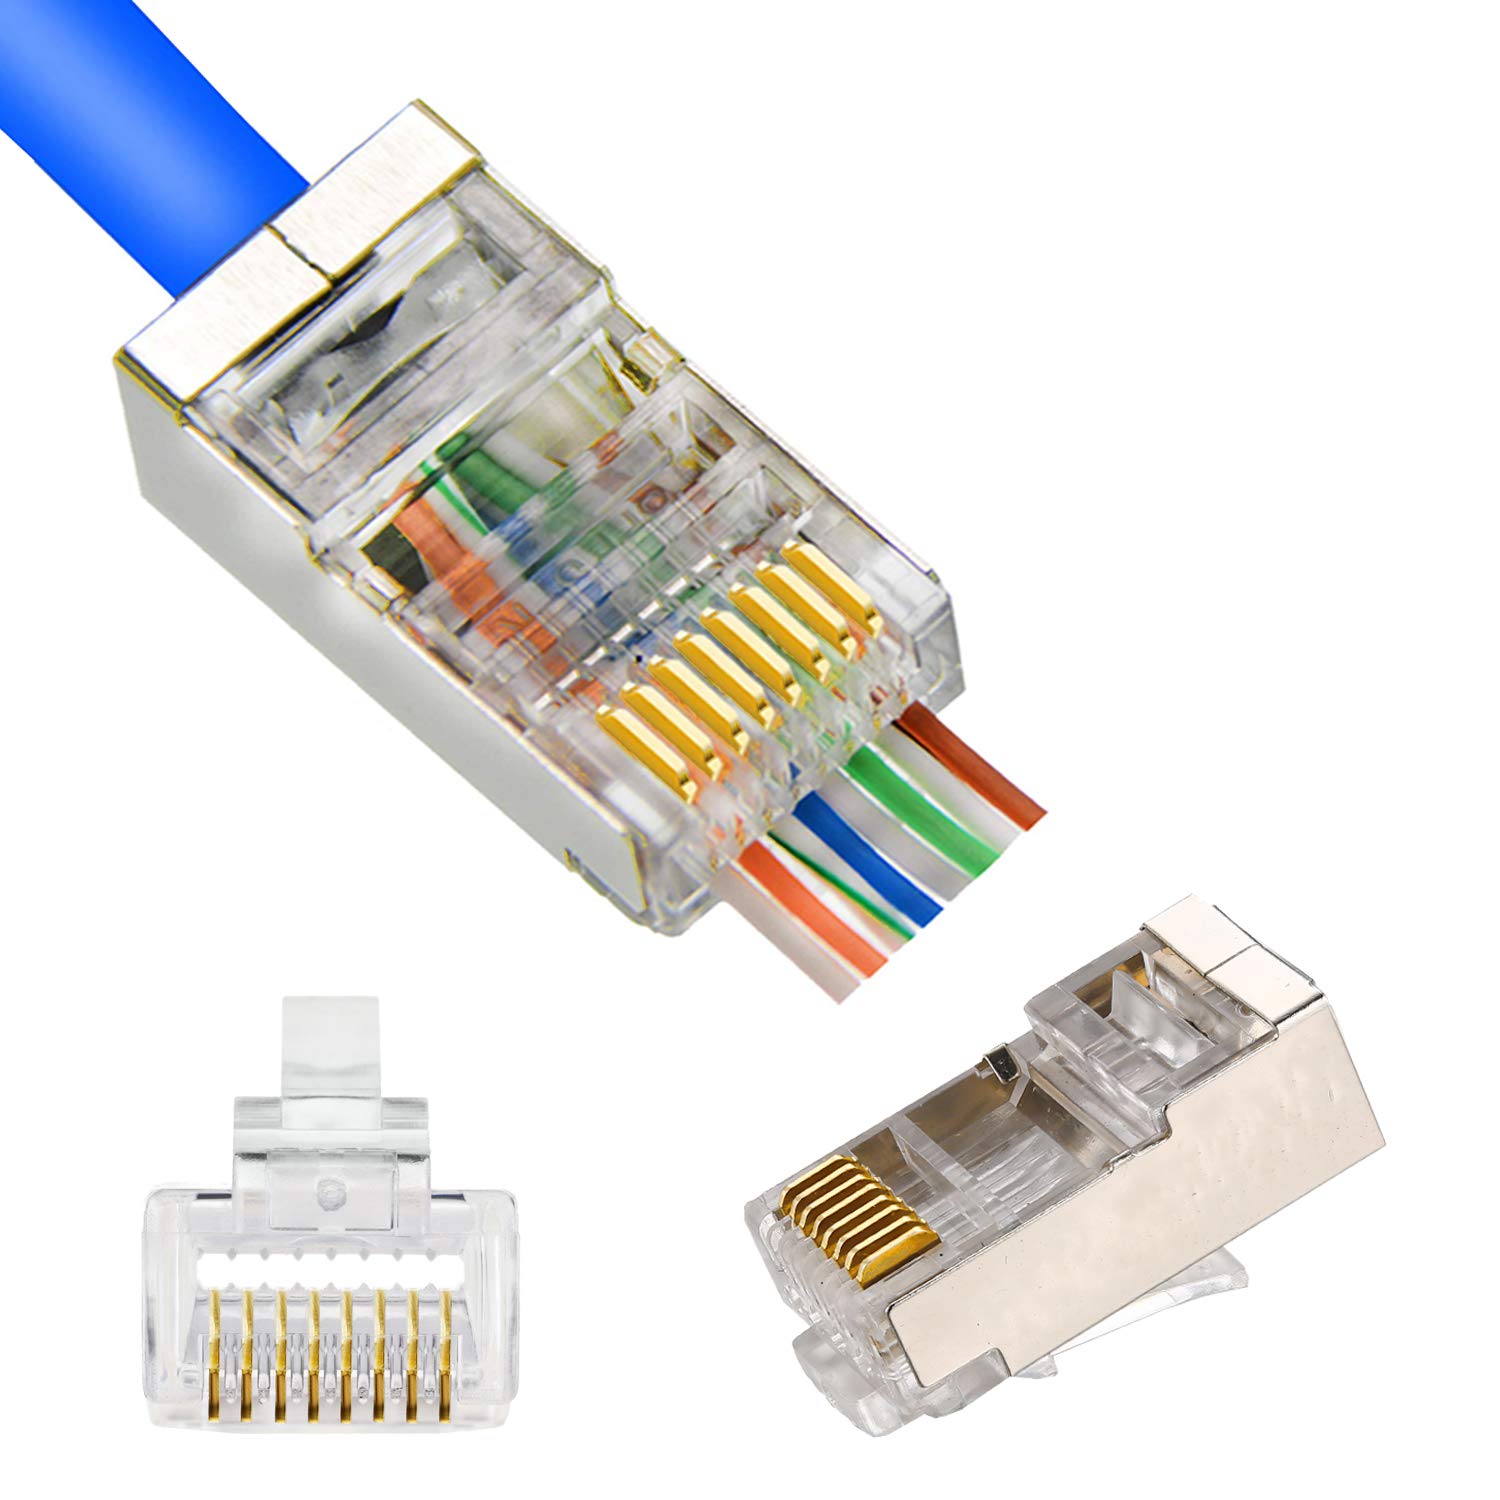 RJ 45 connector is 1 of the Best Product By BGI - BGI